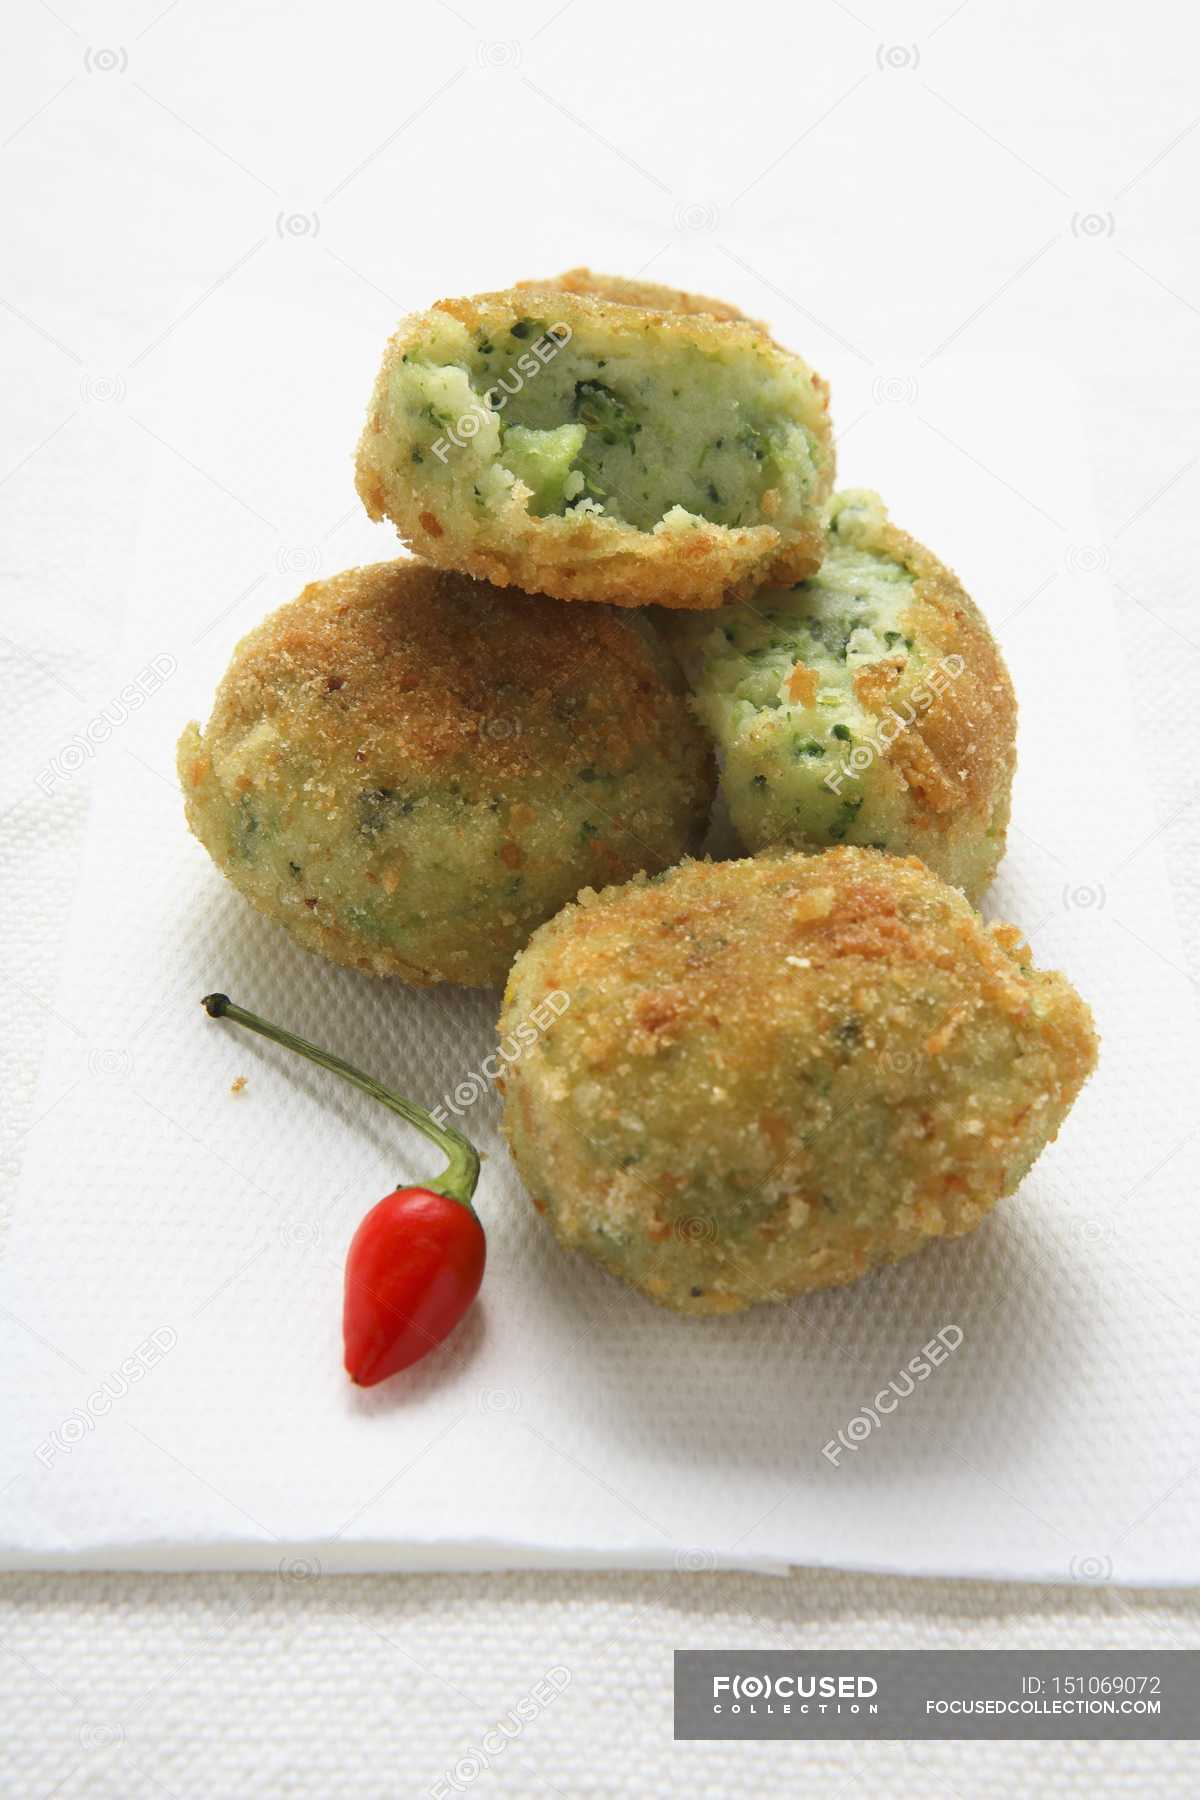 Crocchette Ai Broccoletti Broccoli Croquettes On White Background Gourmet Vegetables Stock Photo 151069072,Hot Tottie Lotion